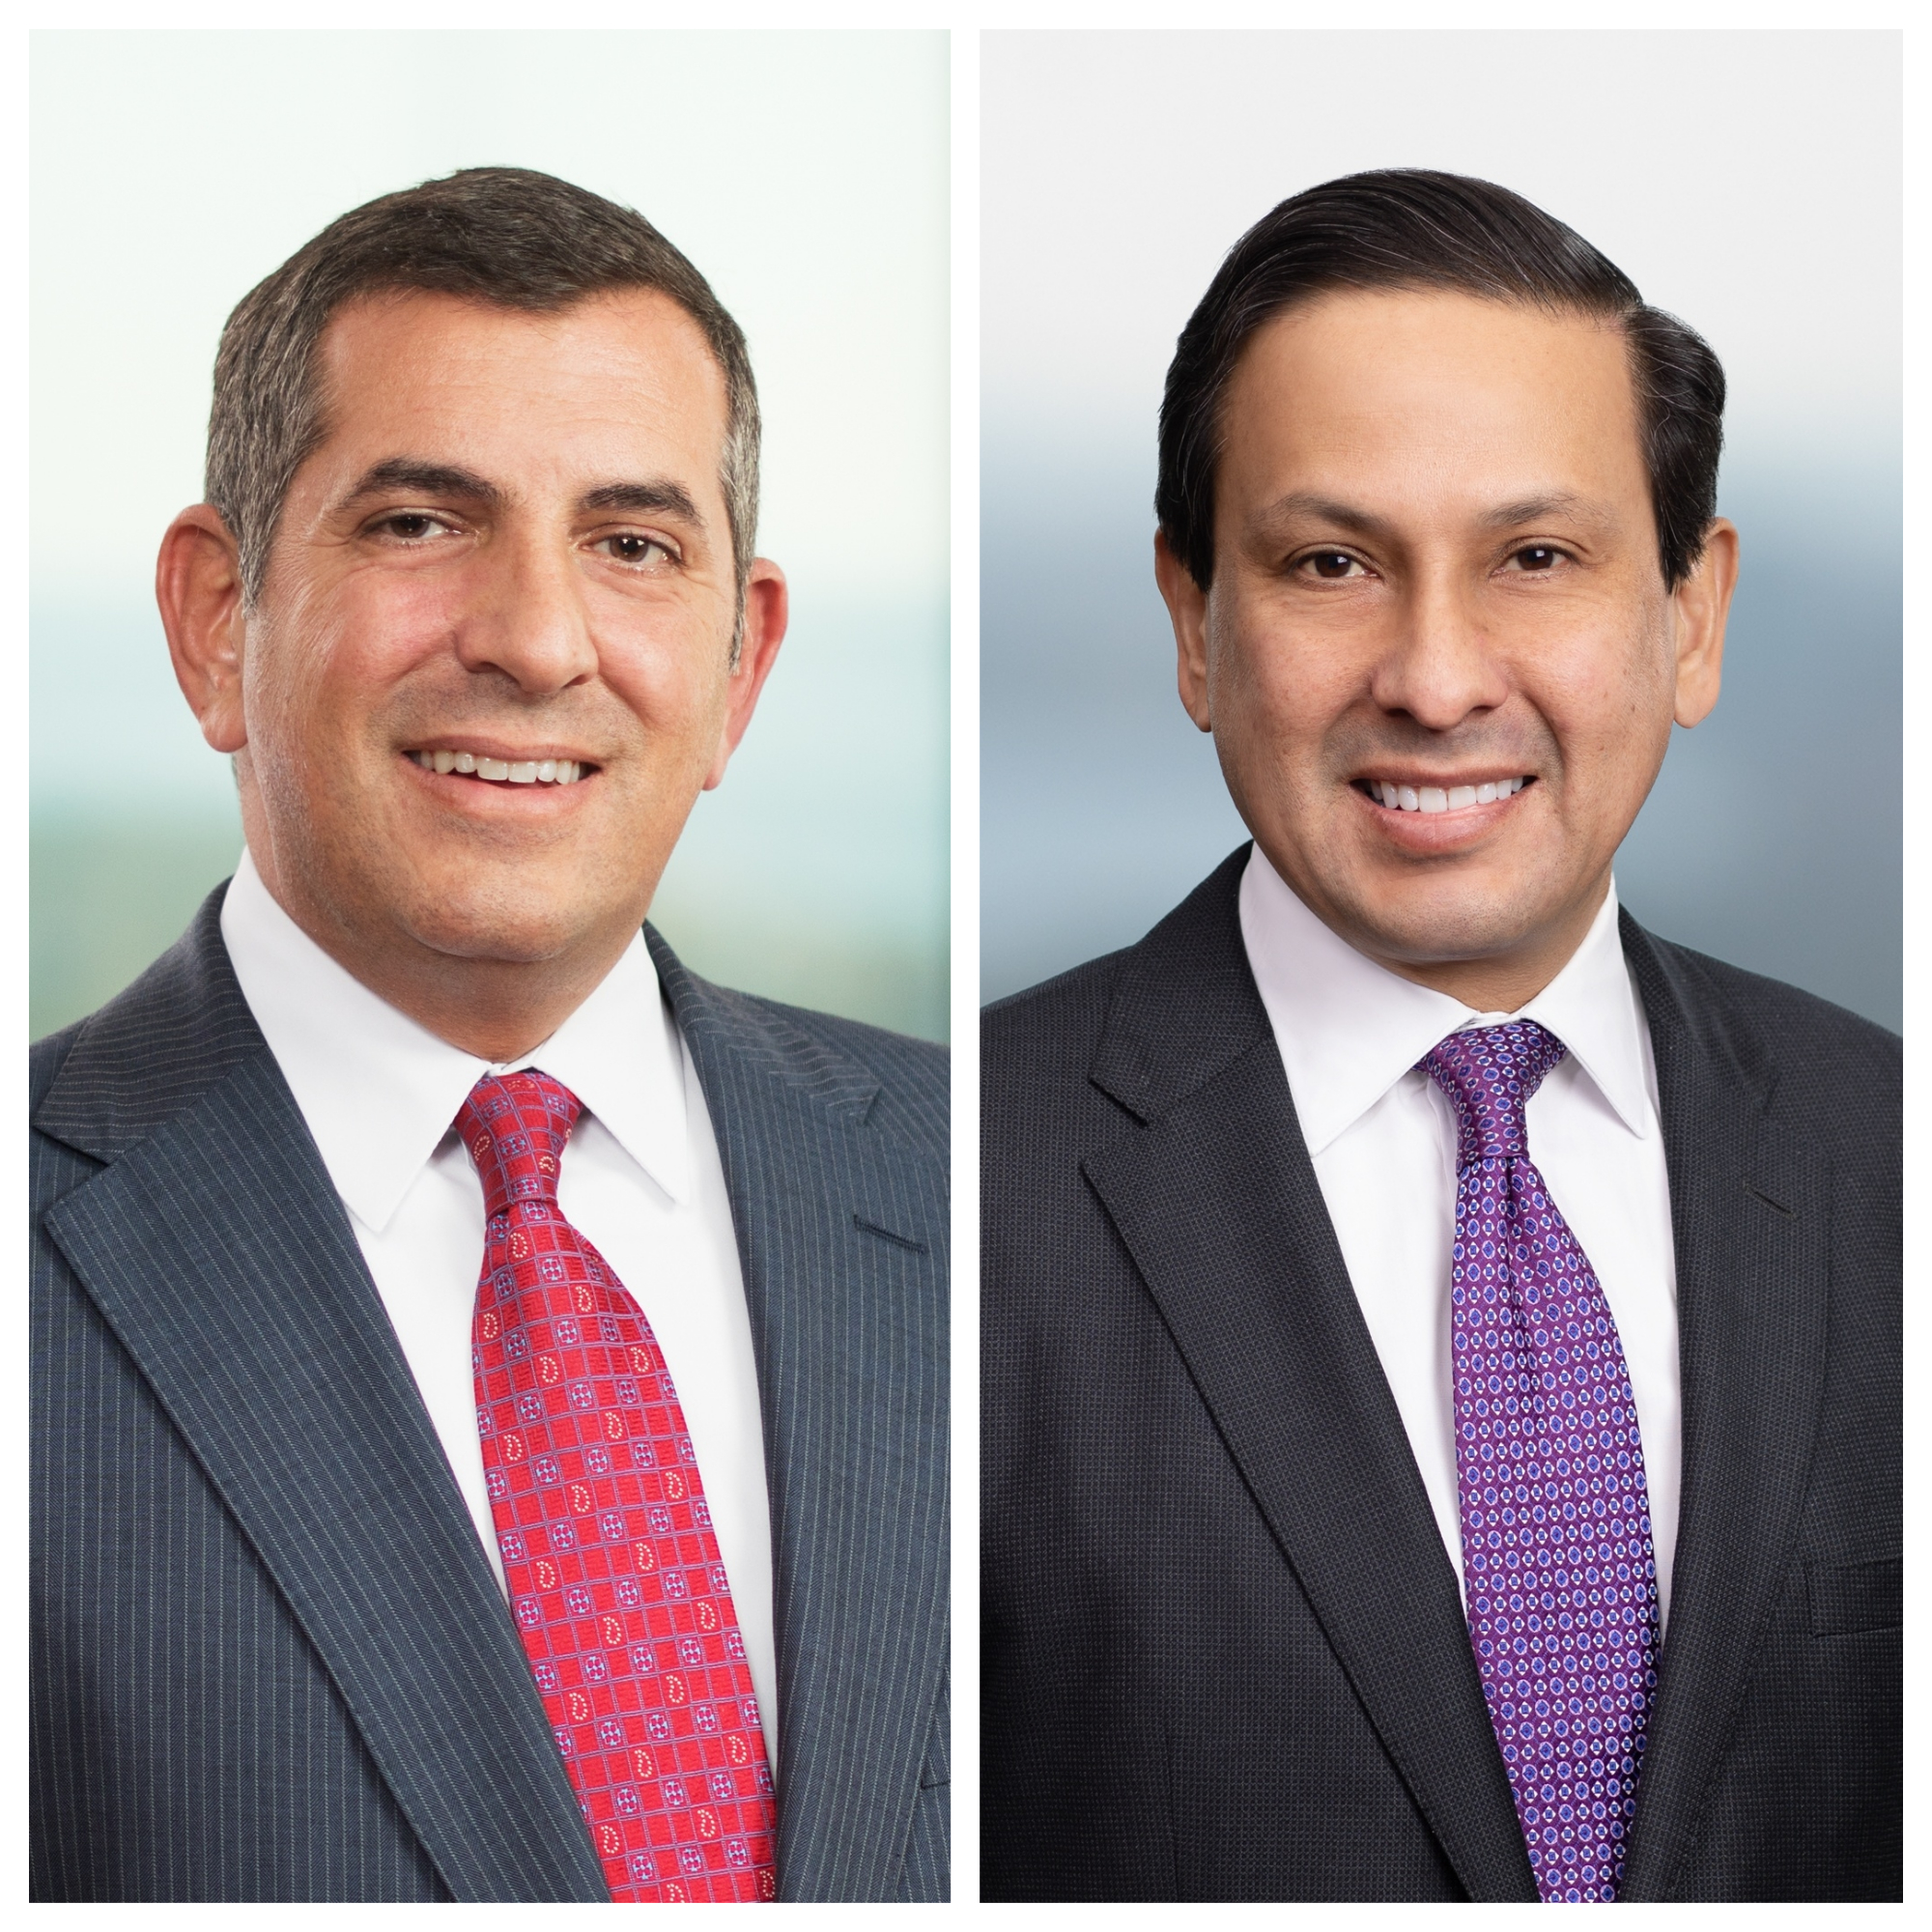 Tampa Bay EDC Taps Two Shumaker Lawyers for Leadership Roles in Advancing Economic Growth in the Region